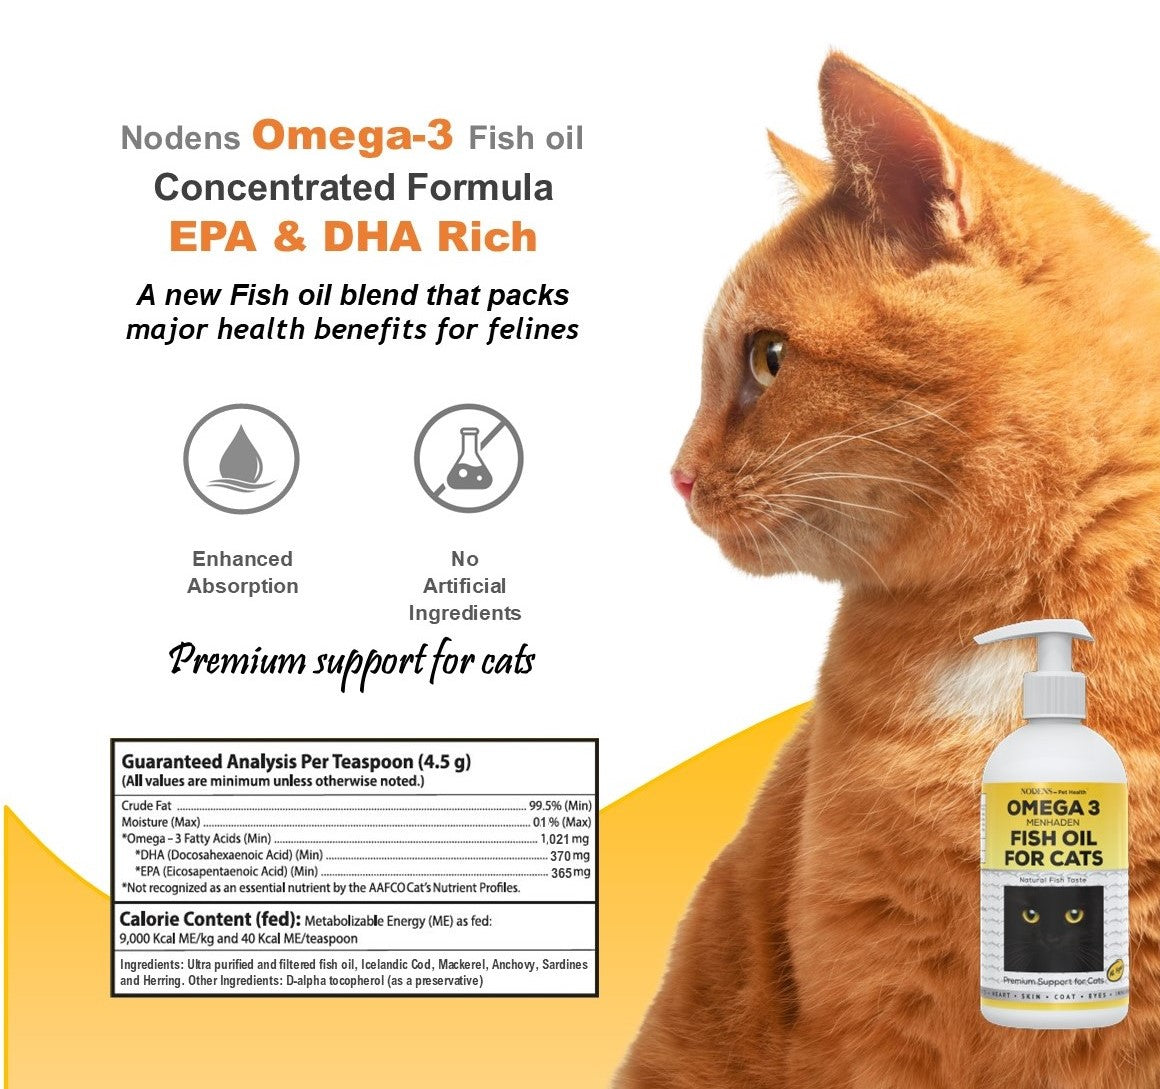 Nodens Omega-3 Fish oil for Cats